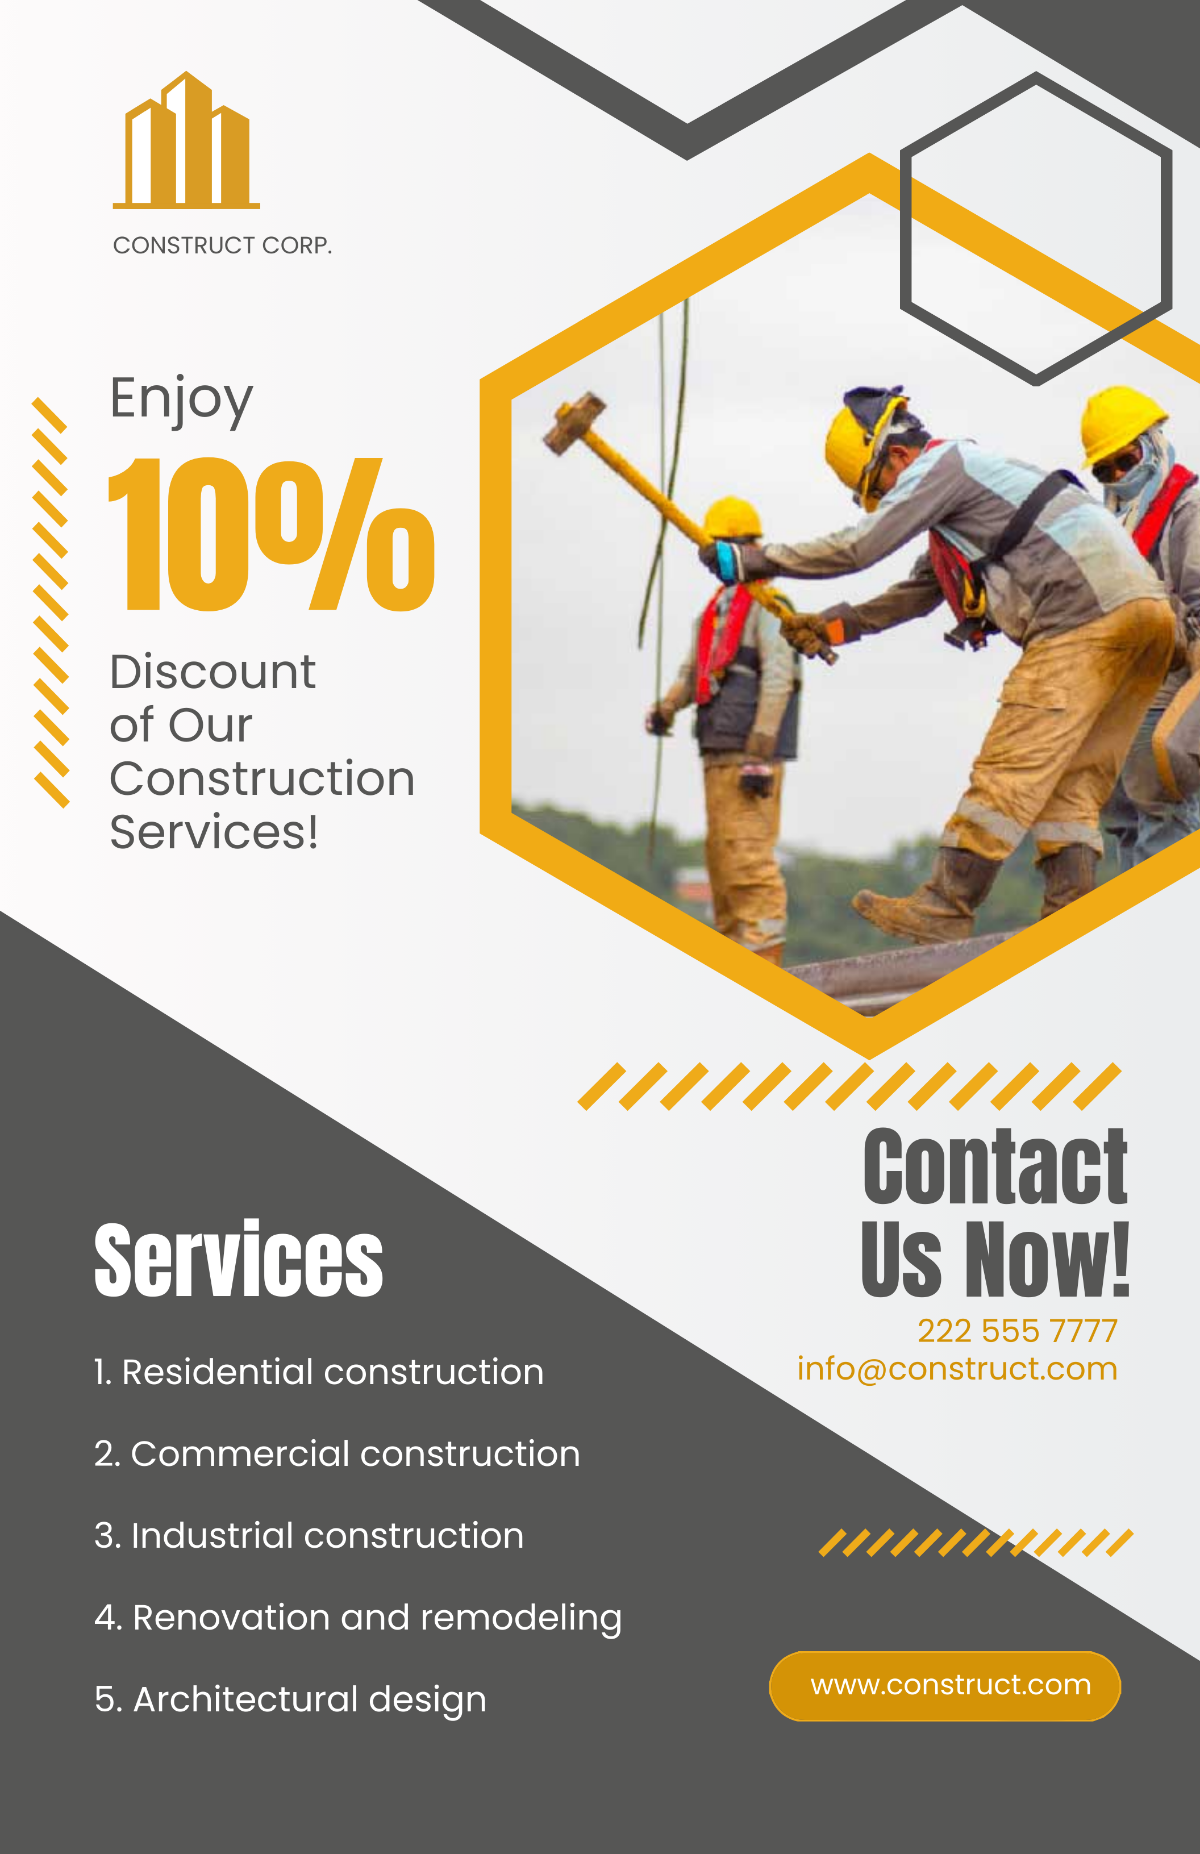 Construction Poster Background Template